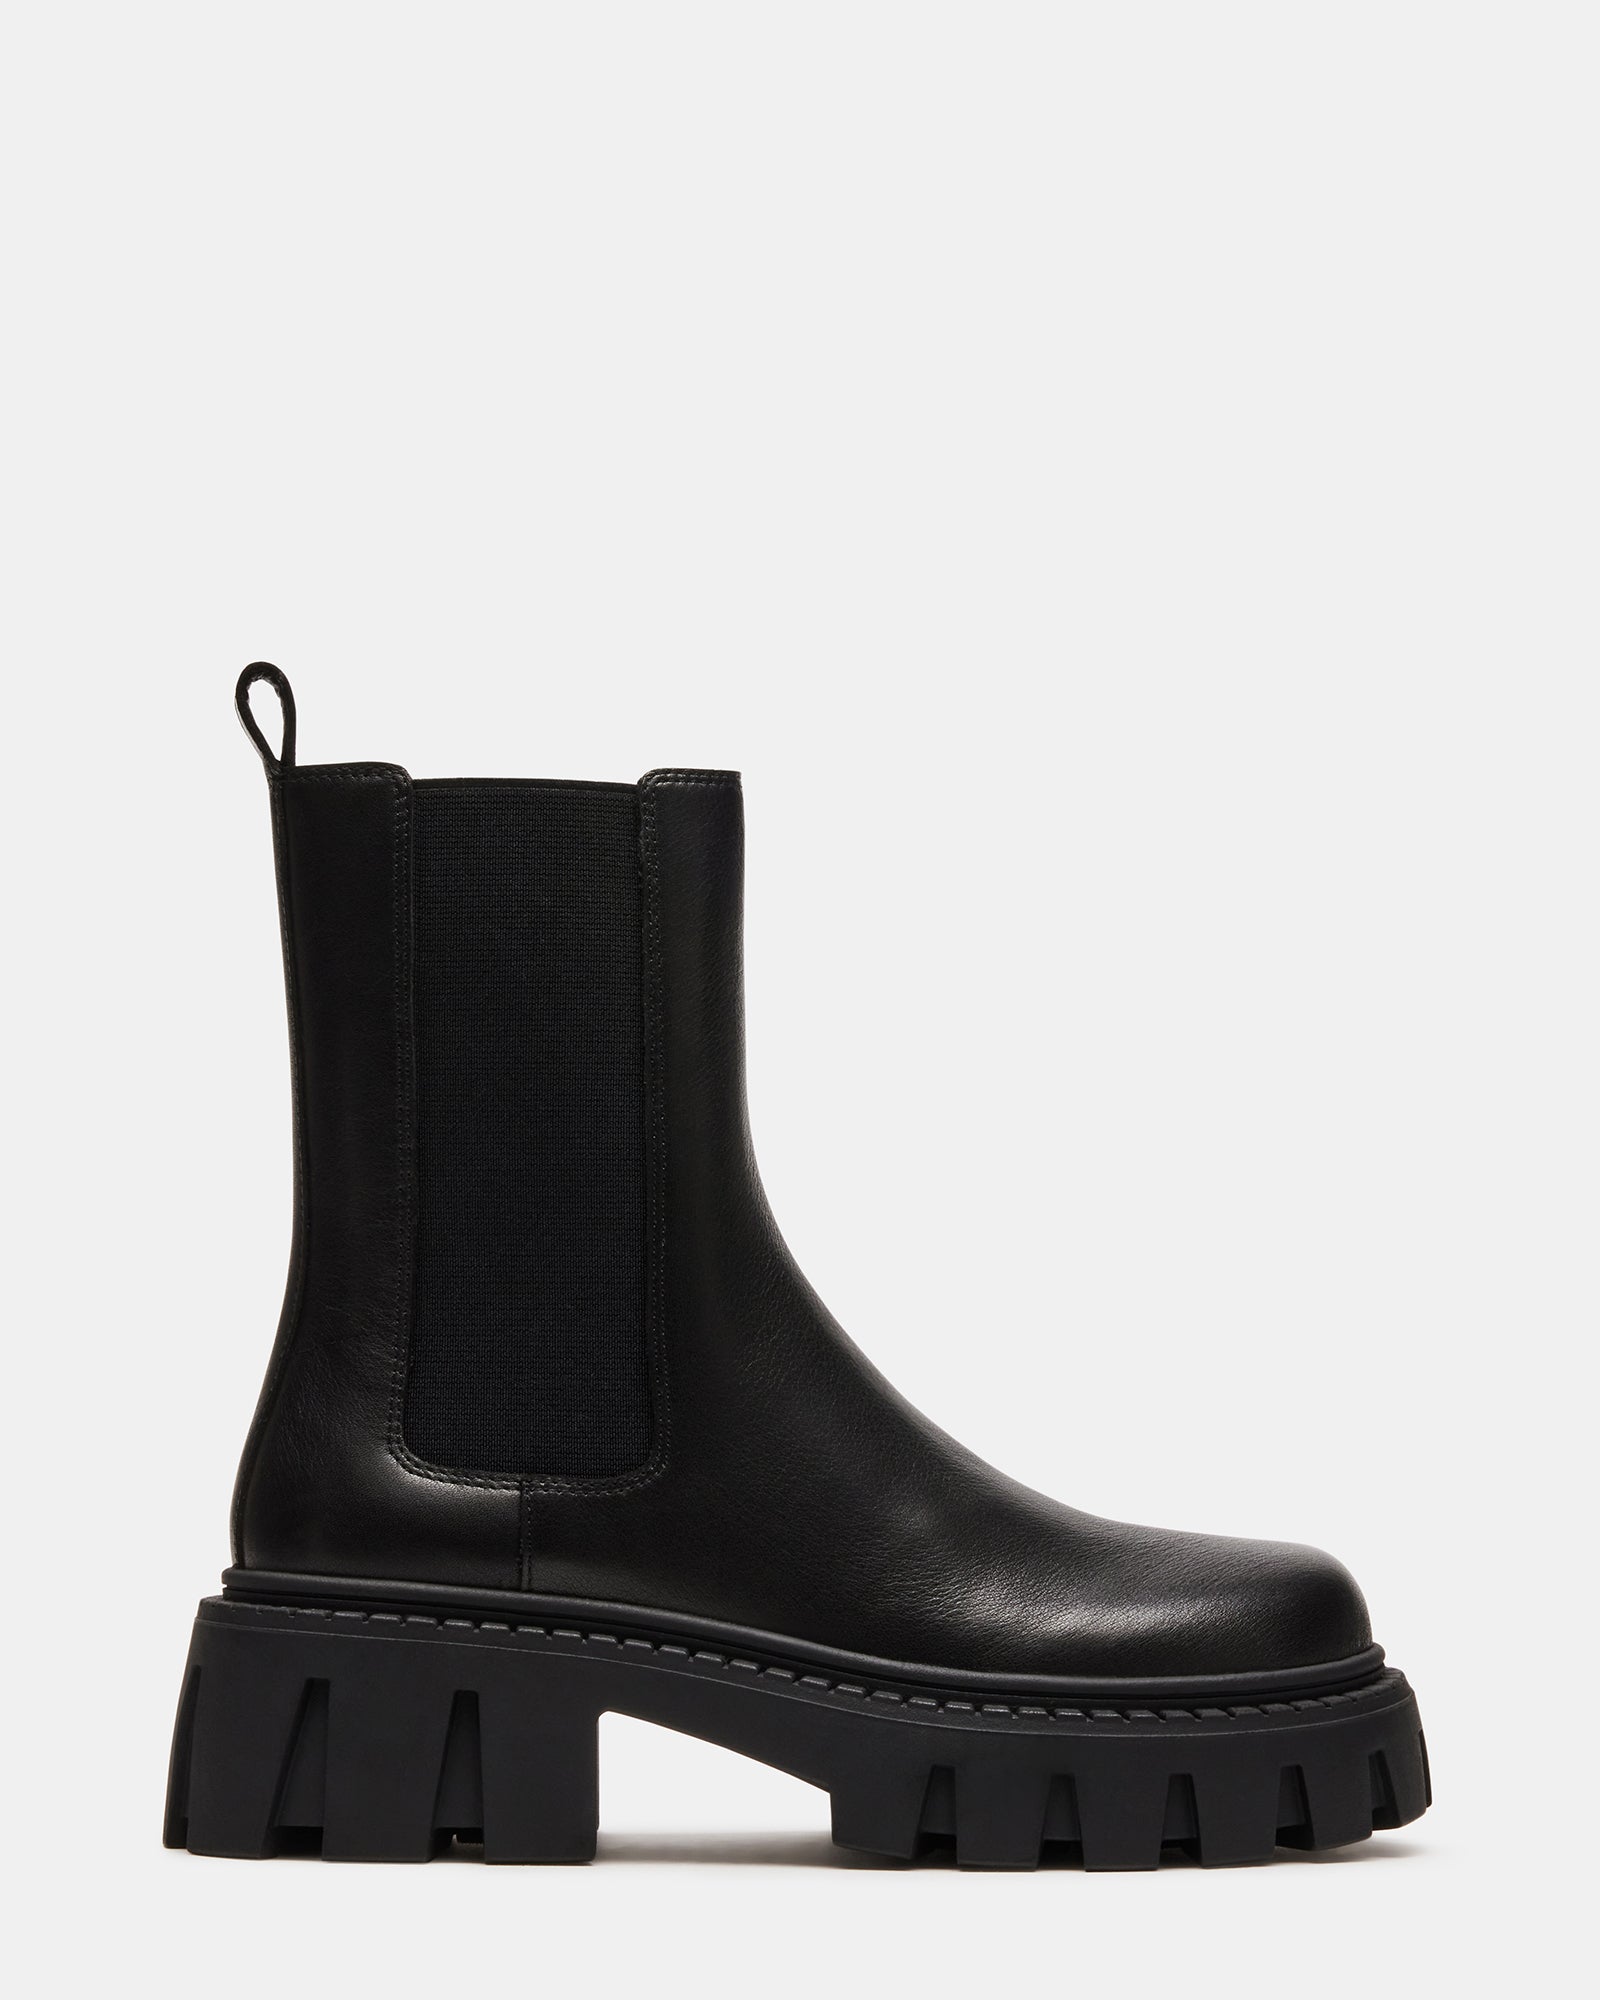 CHARGES Black Leather Platform Bootie | Women's Booties – Steve Madden